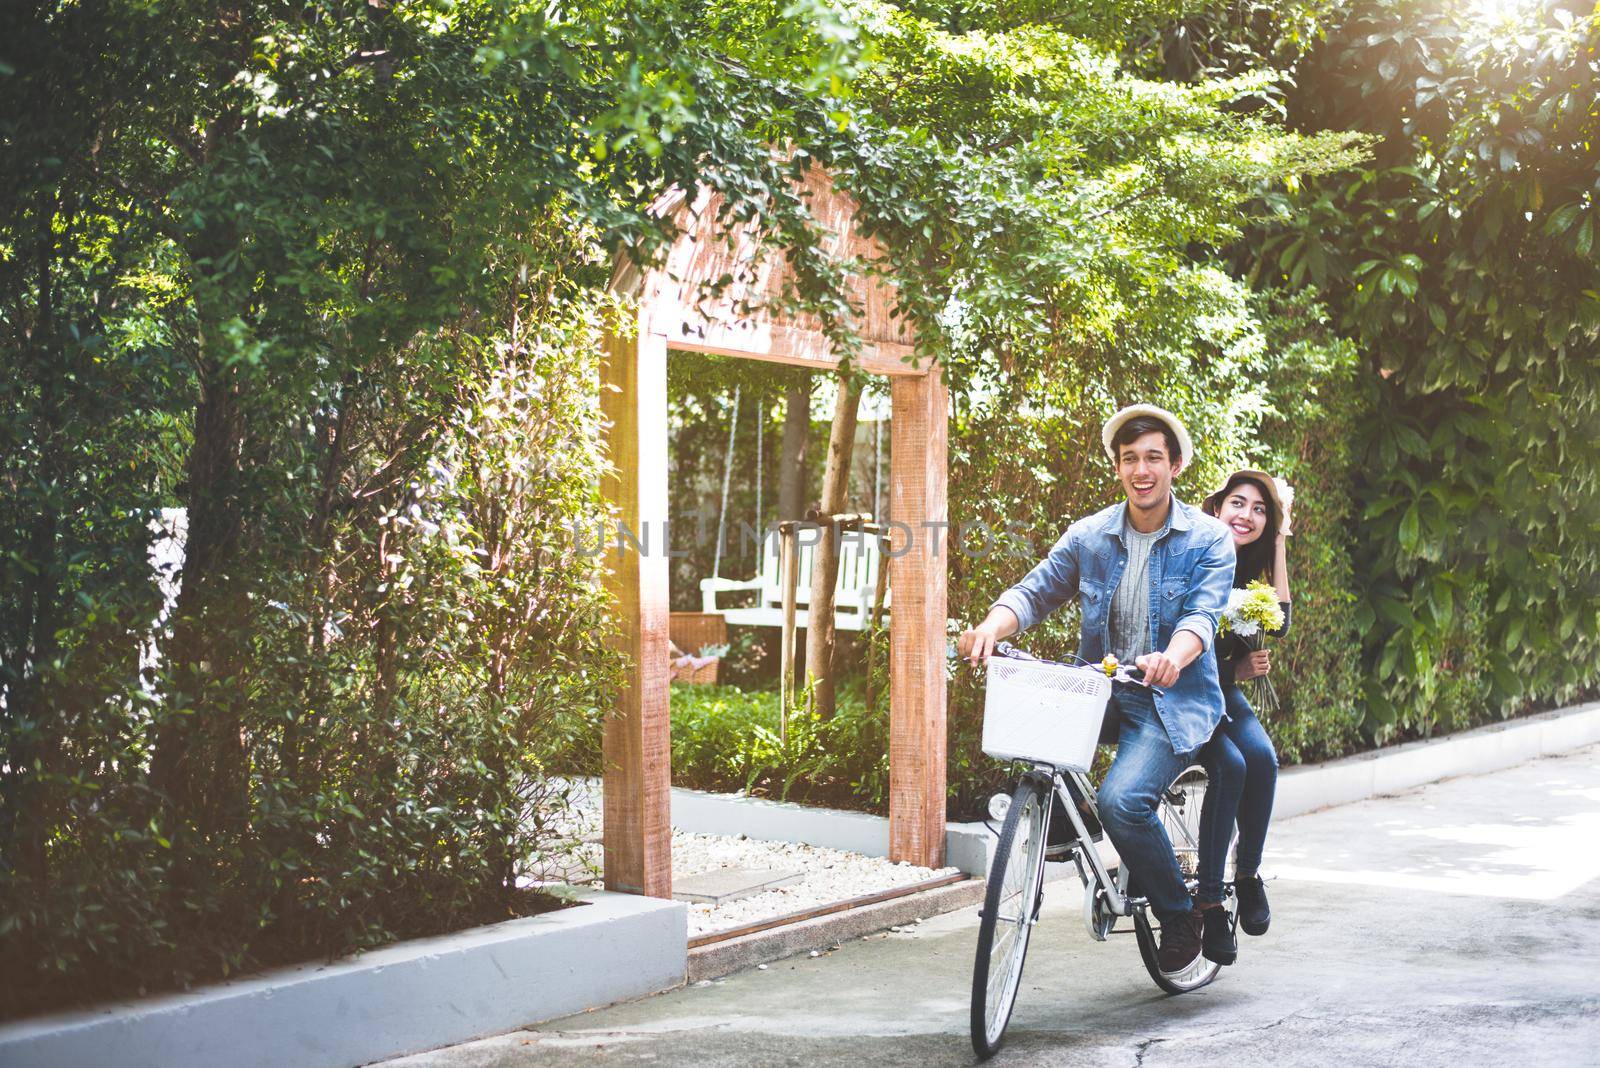 Happy couple riding bicycle together in romantic view park background. Valentine's day and wedding honeymoon concept. People and lifestyles concept.